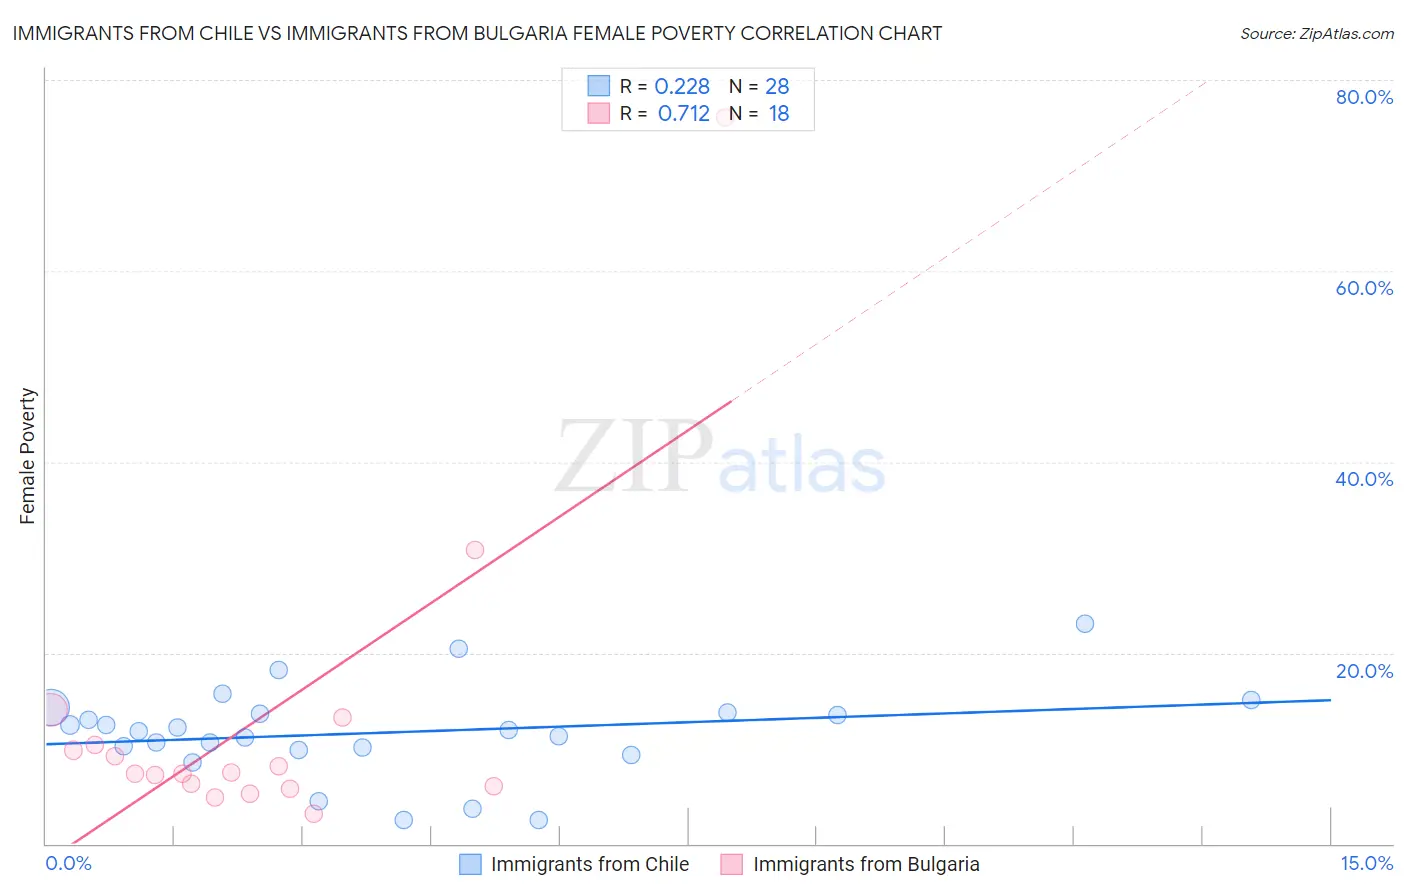 Immigrants from Chile vs Immigrants from Bulgaria Female Poverty